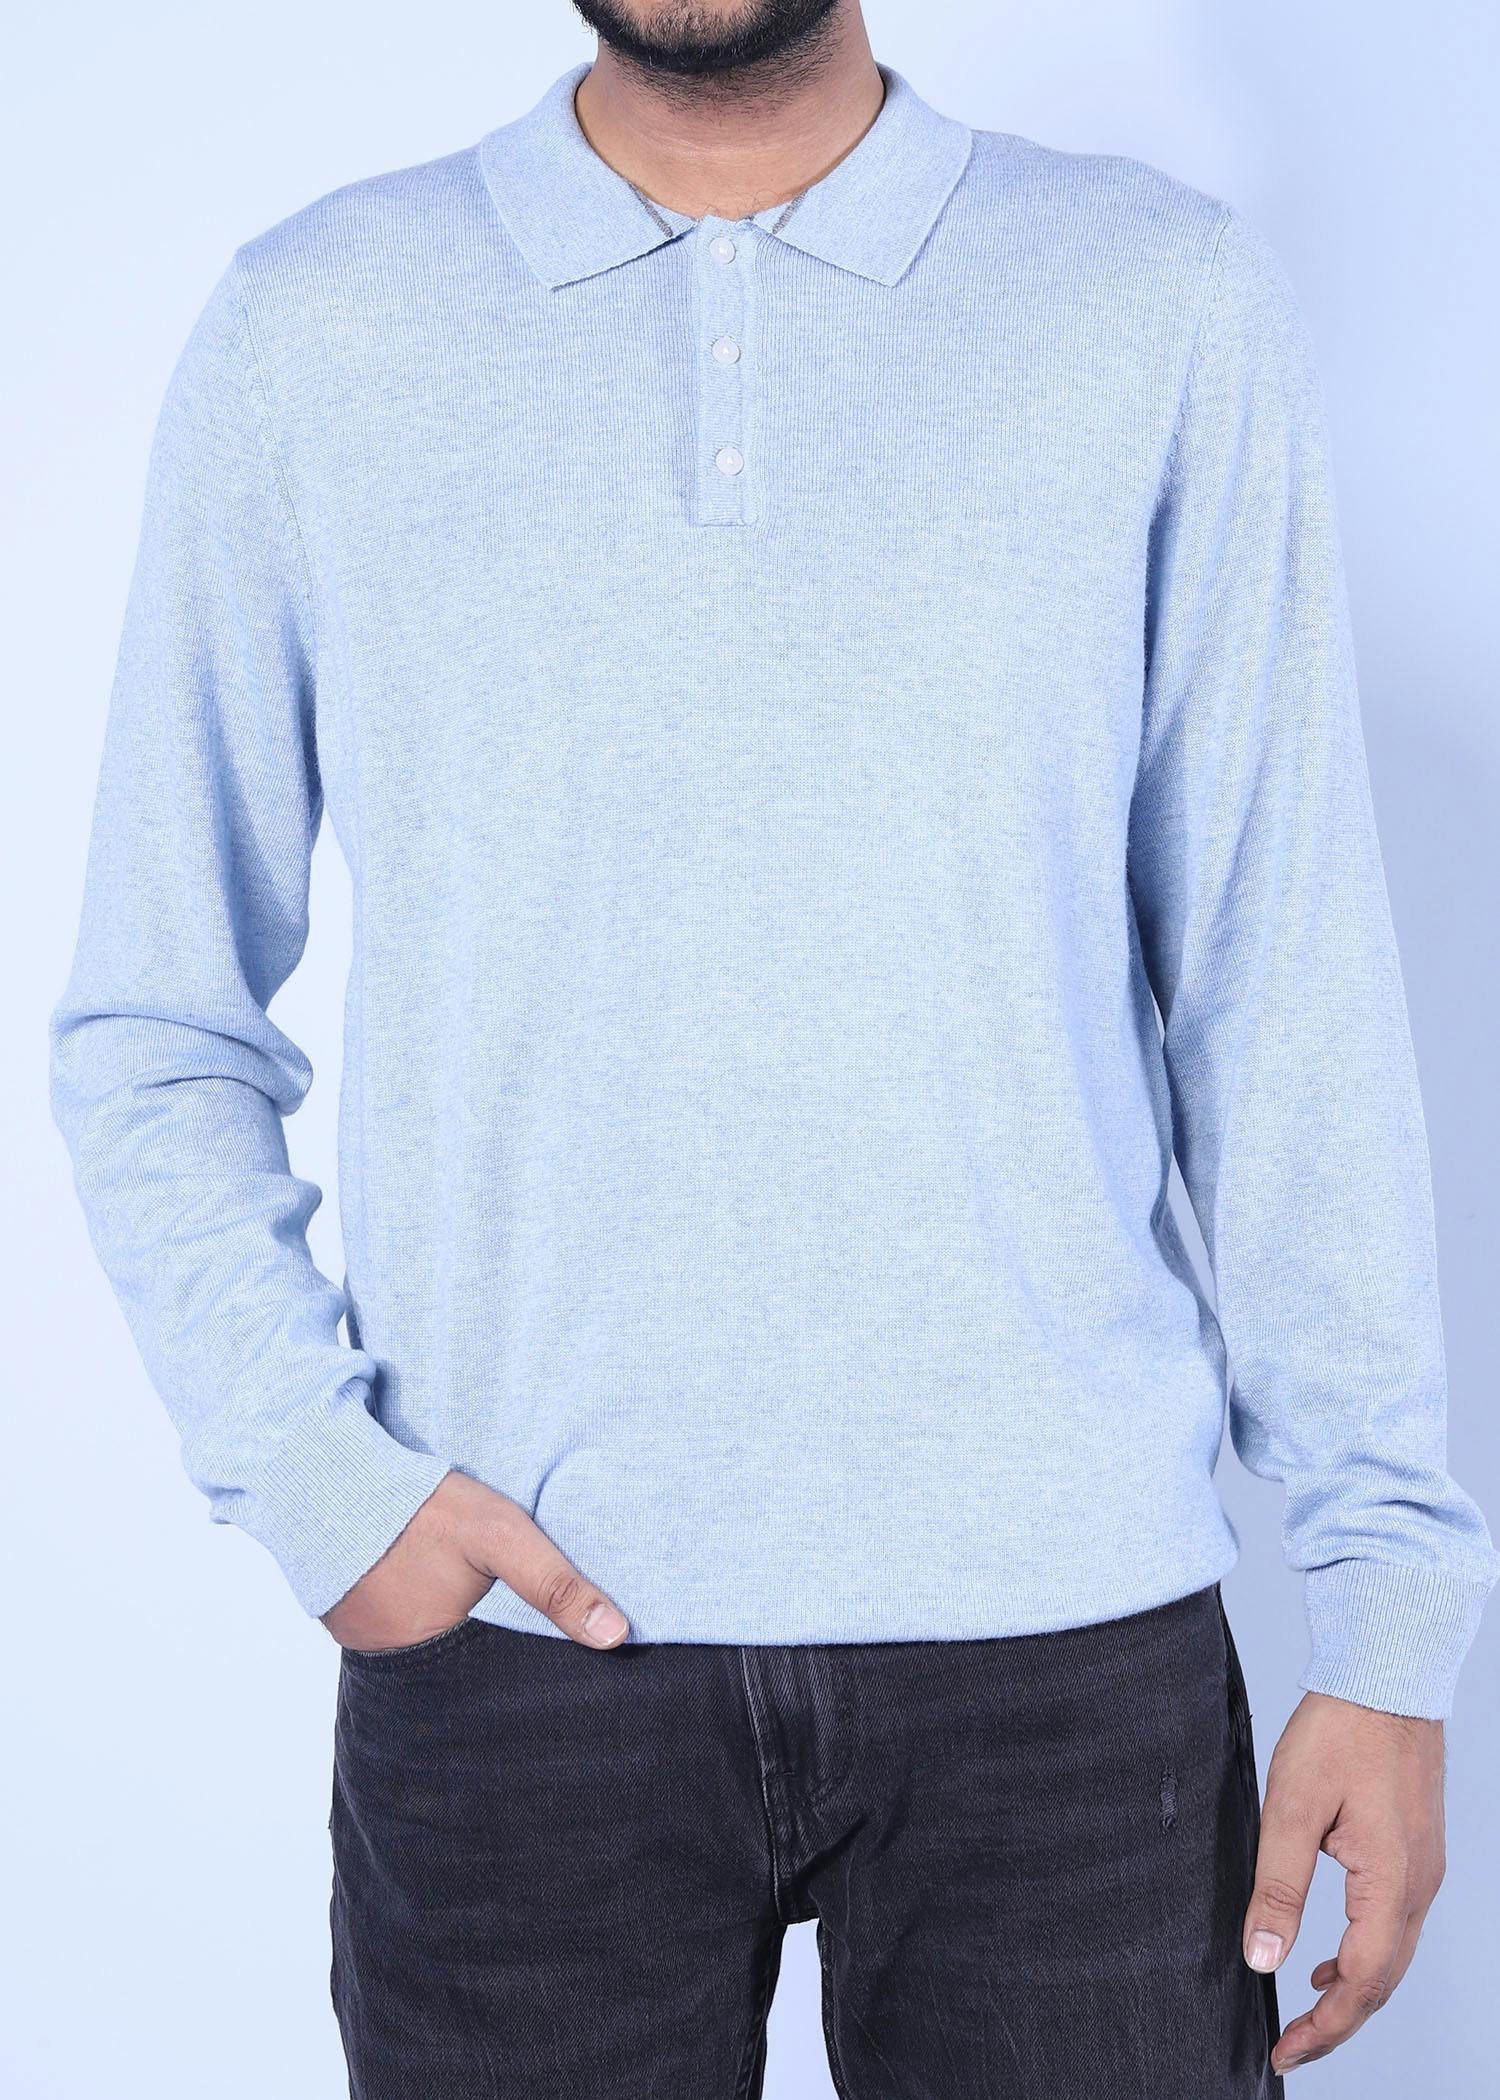 athens sweater sky blue color half front view